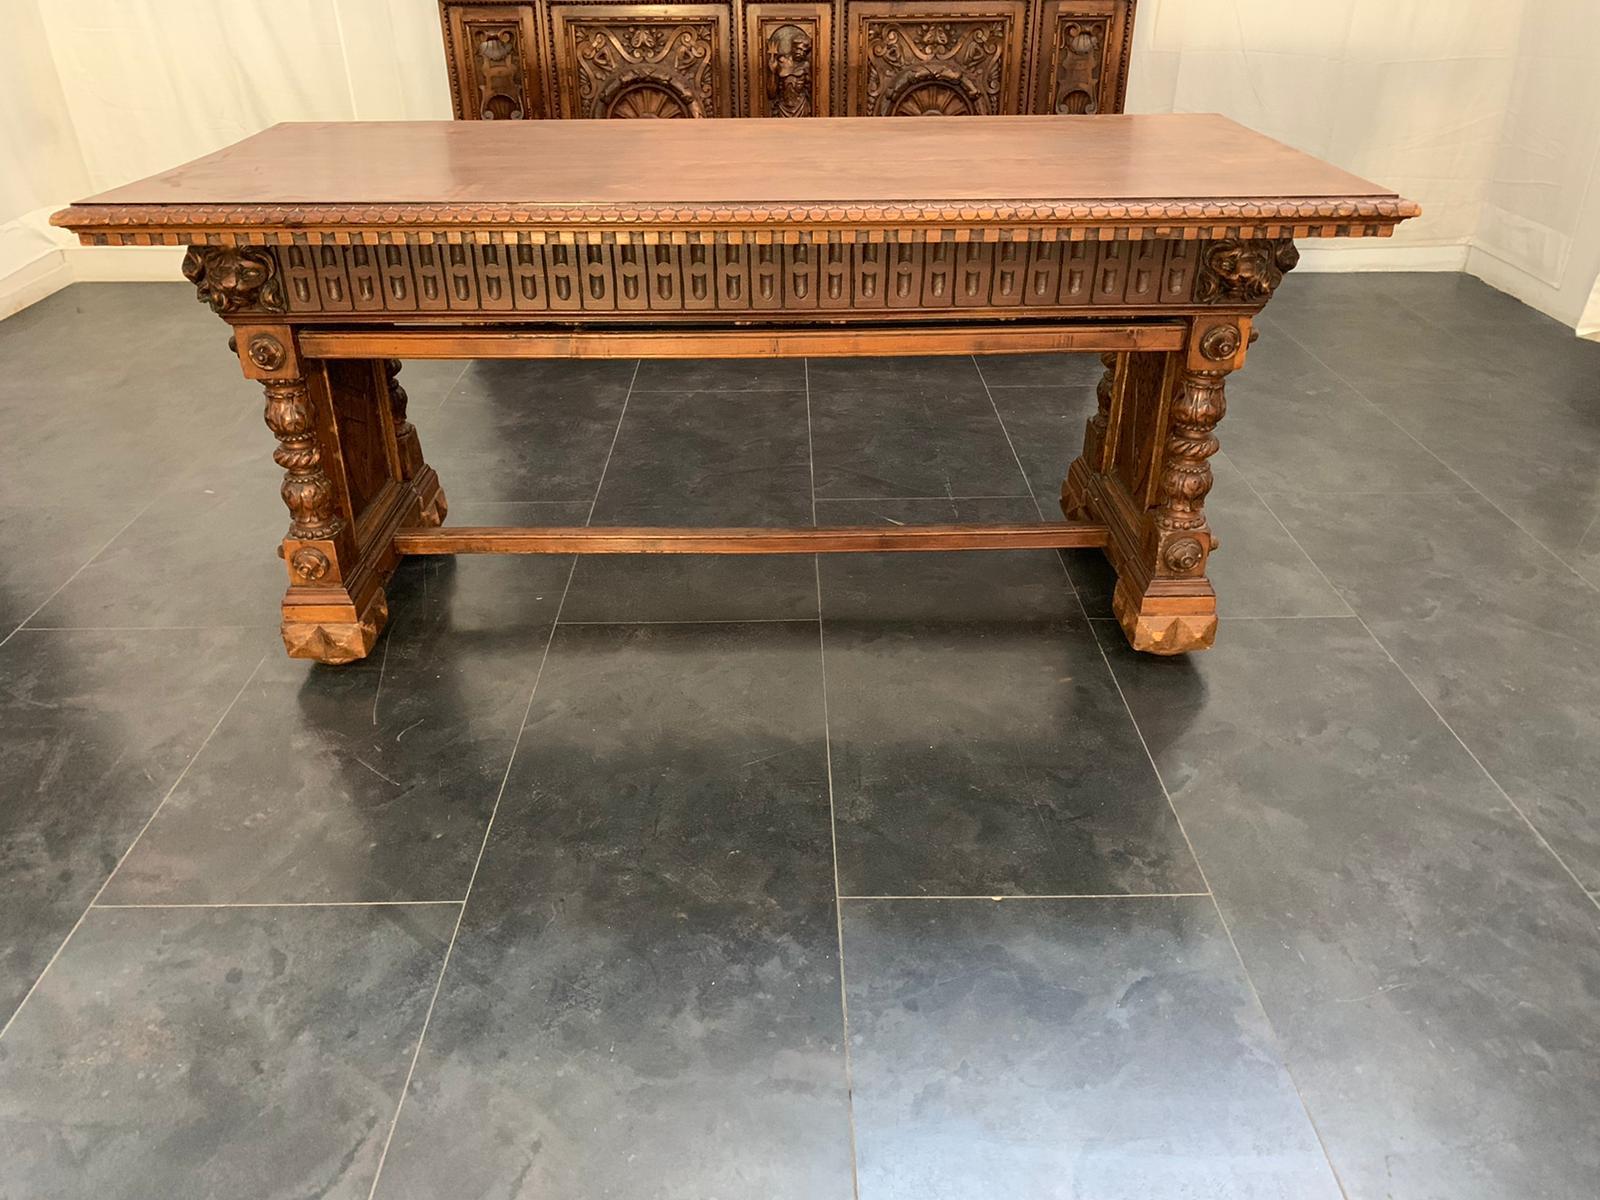 Walnut table in Neo-Renaissance style dating from the late 19th century.
Packaging with bubble wrap and cardboard boxes is included. If the wooden packaging is needed (fumigated crates or boxes) for US and International Shipping, it's required a